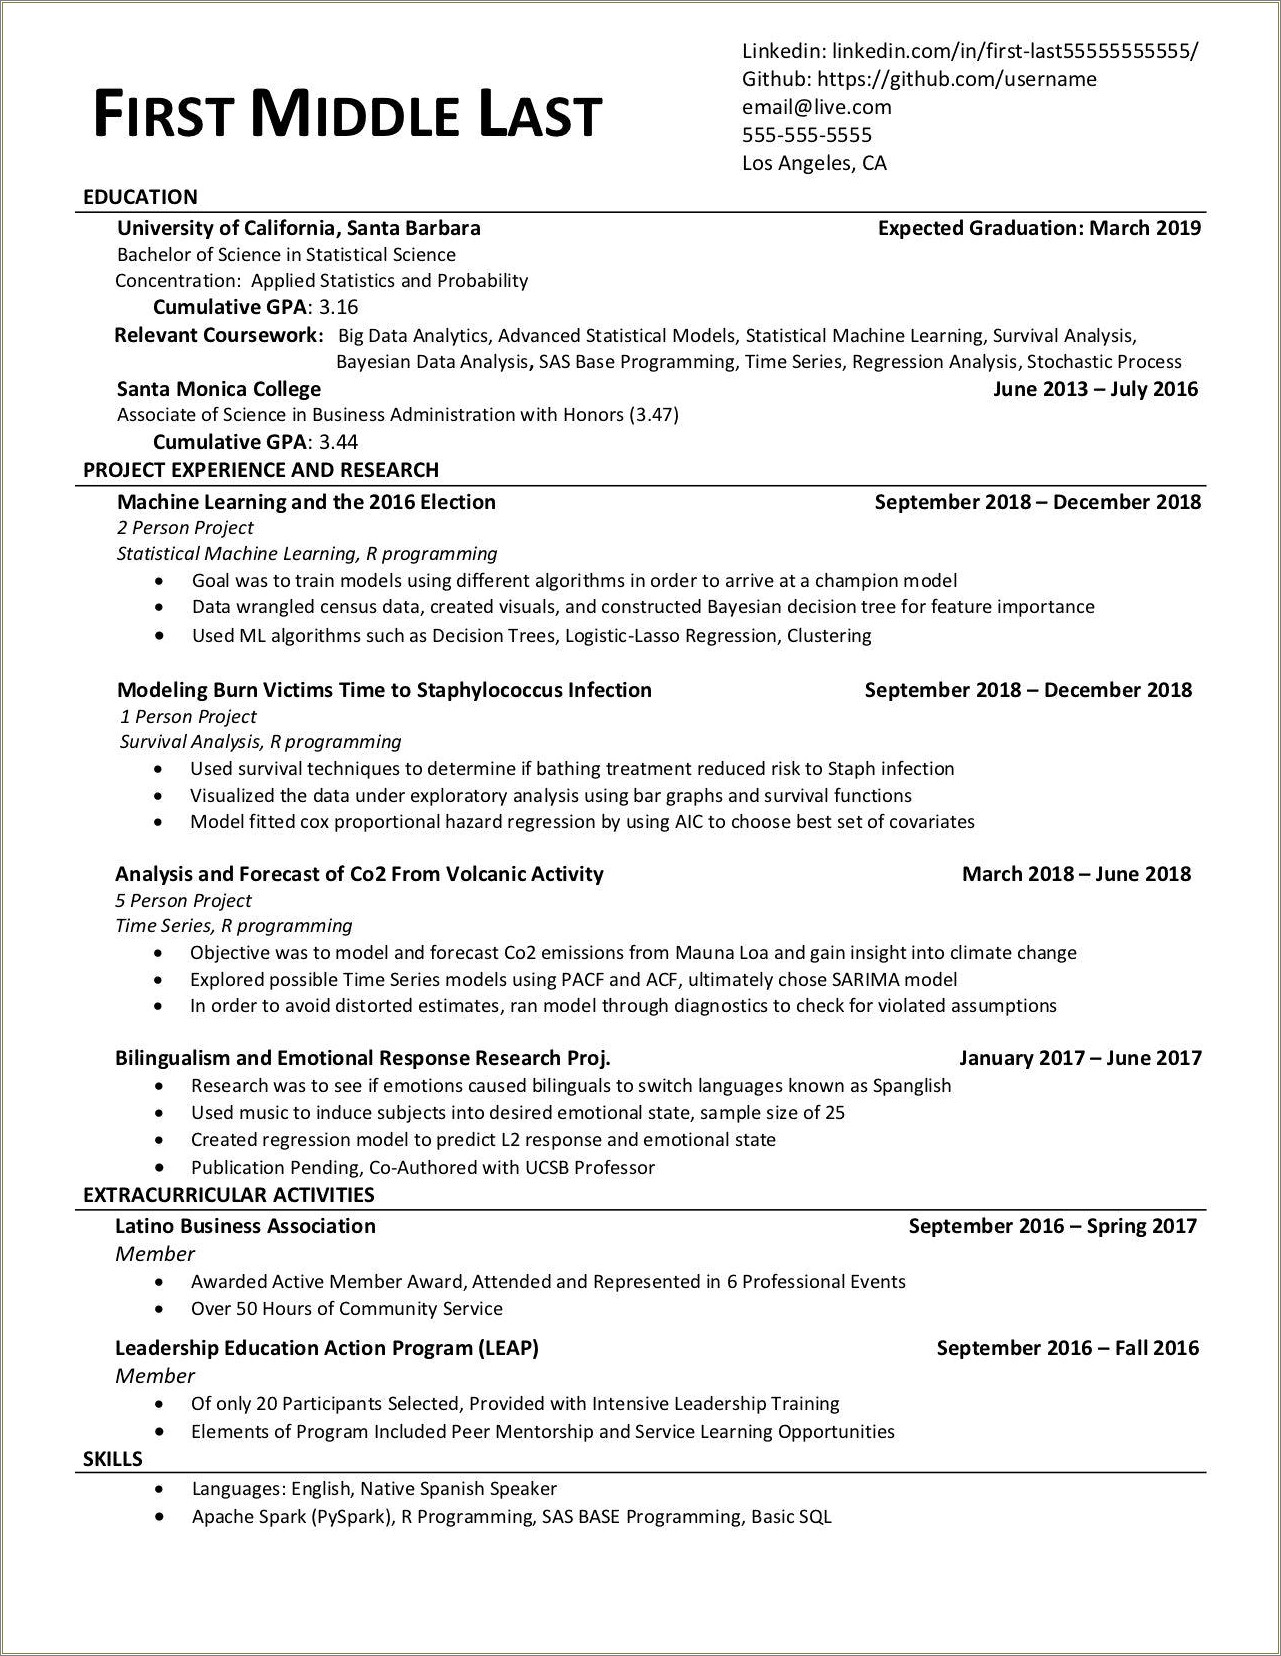 Relevent Profaessional Experience Resume For Grad School